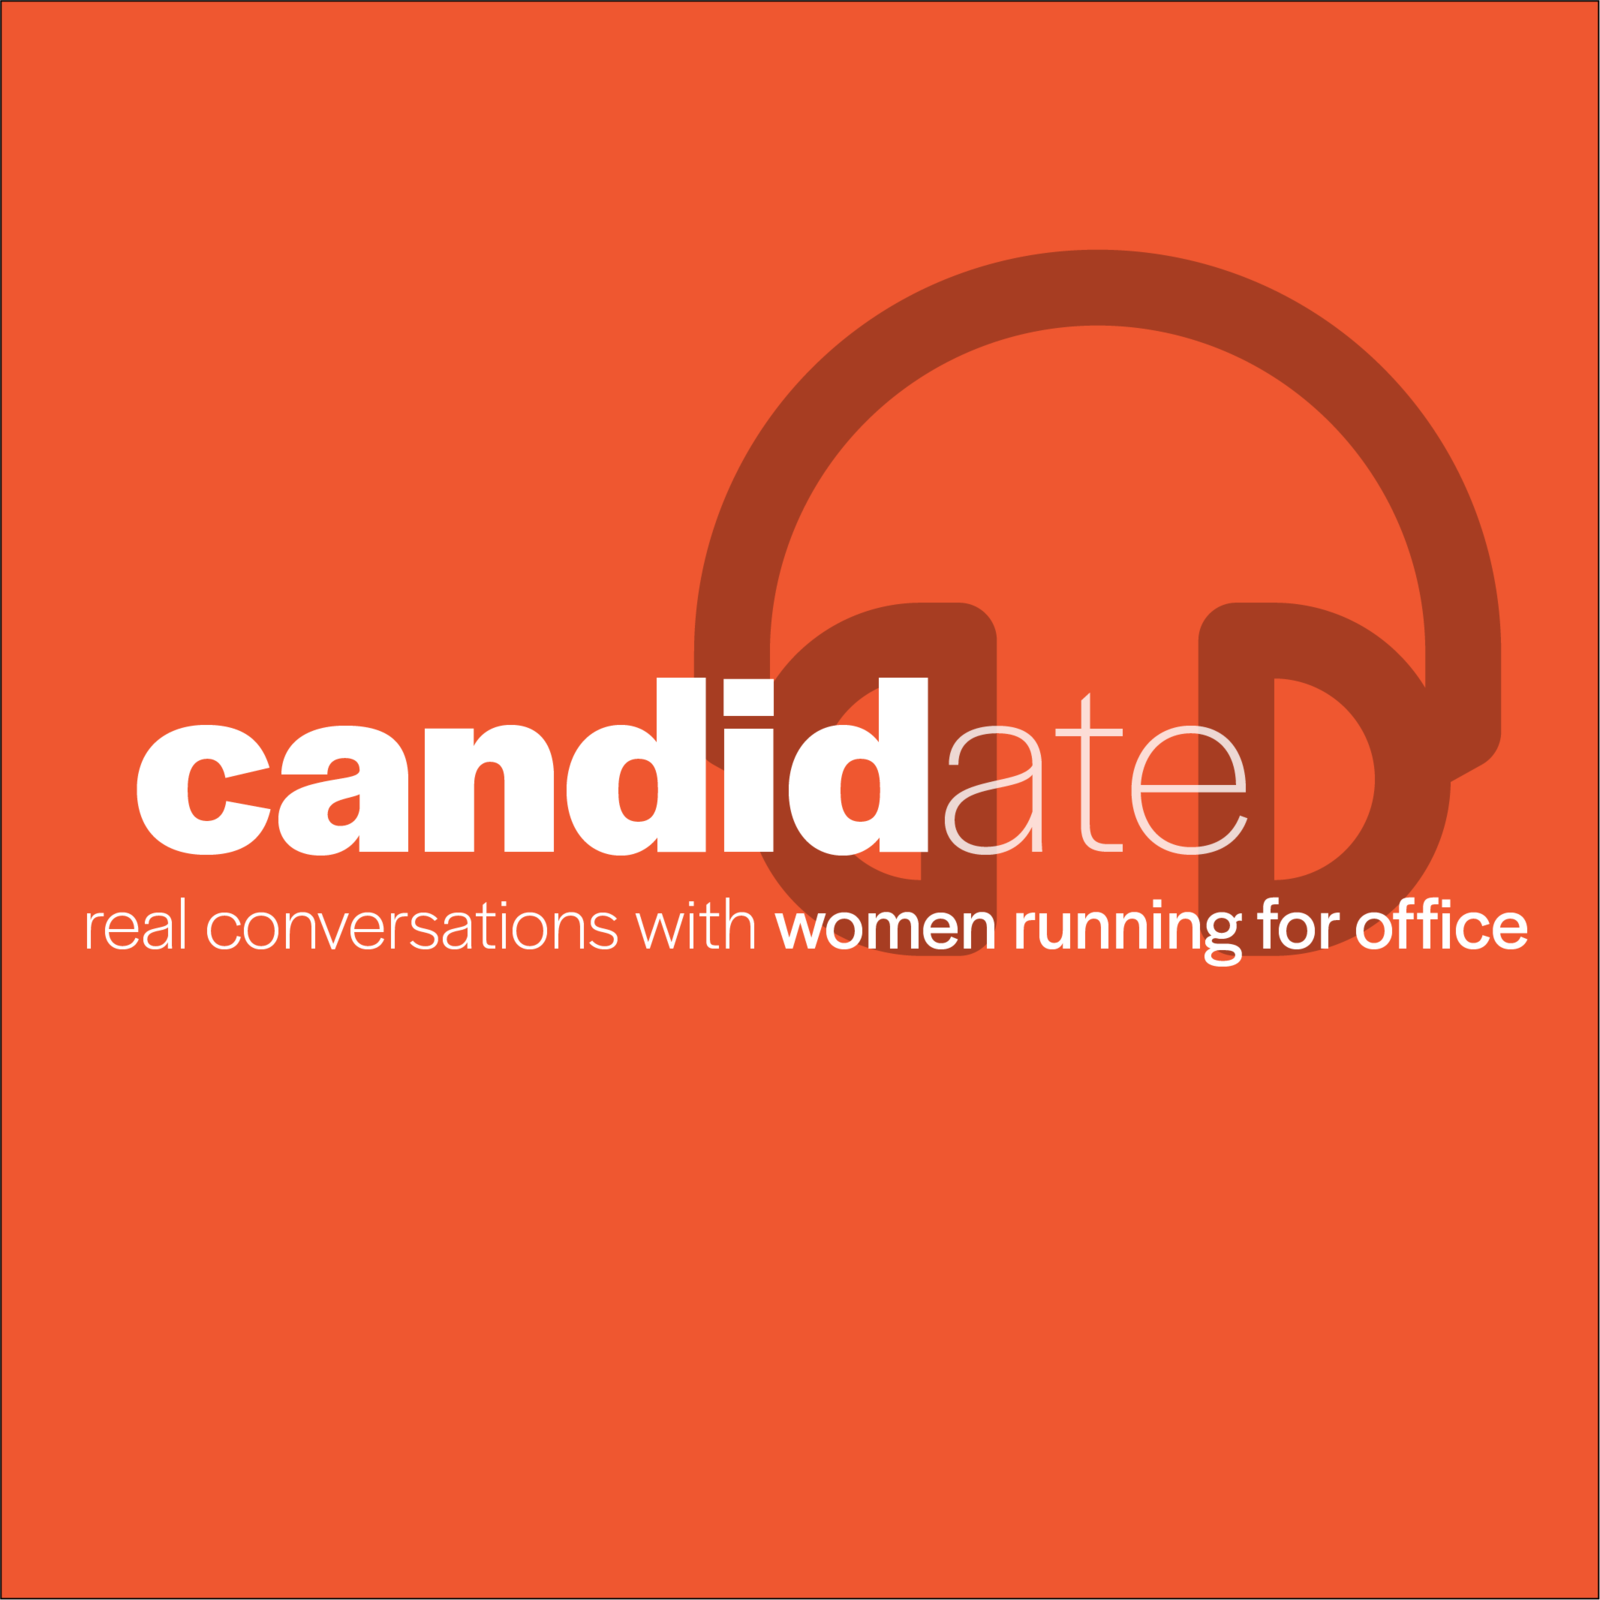 S2 Ep96: Candid(ate) Episode 8: The Future is Female f/ Gretchen Whitmer and Jocelyn Benson